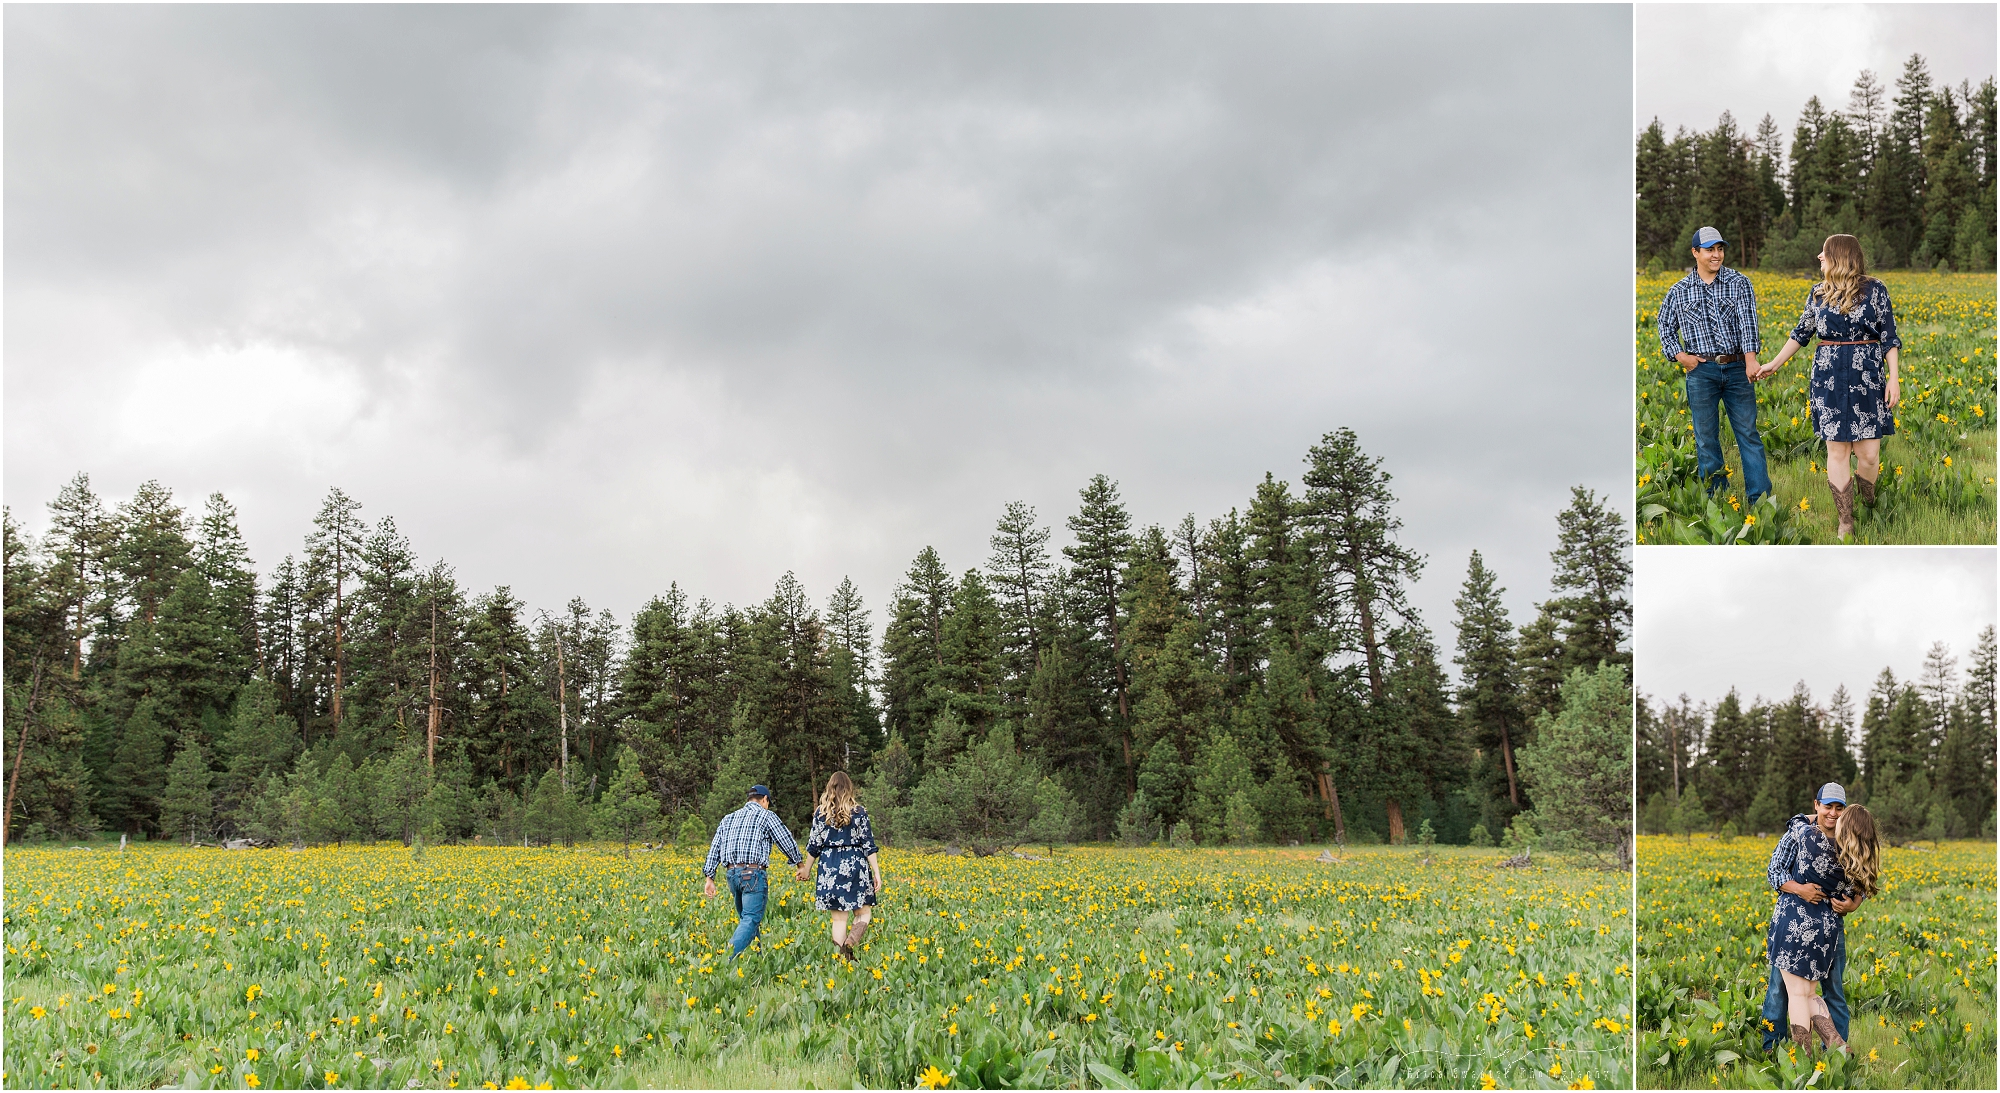 Gorgeous stormy skies provided awesome moody lighting at this Oregon outdoor adventure engagement session. | Erica Swantek Photography